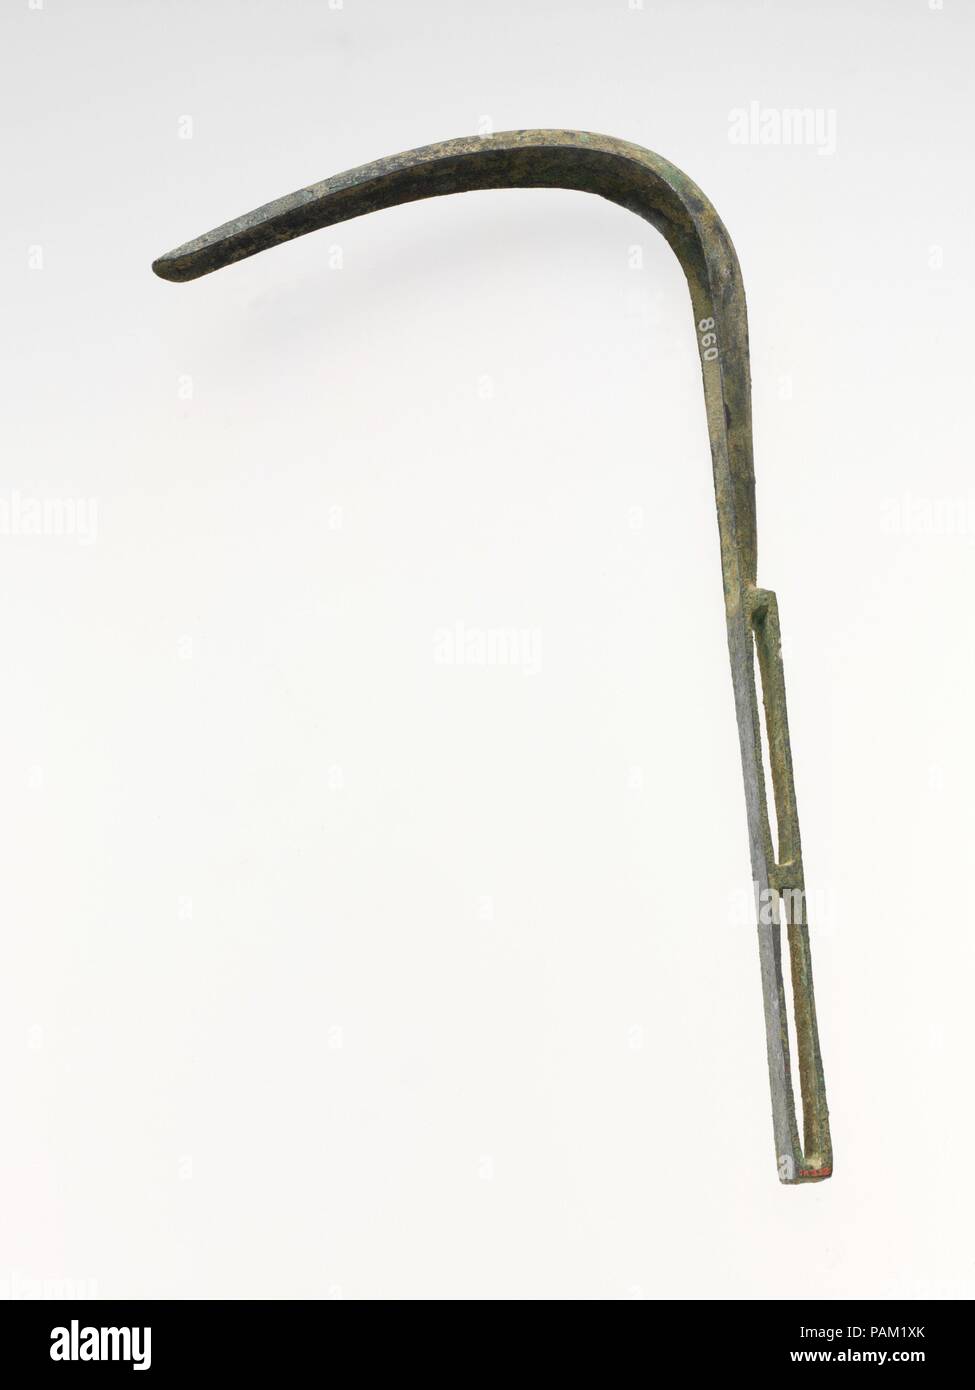 Bronze strigil. Culture: Roman. Dimensions: L. 9 in. (22.8 cm). Date: 1st-2nd century A.D..  The blade is bent to an acute angle. The handle, which is in one piece with the blade, is in the form of a rectangular loop with a cross-piece in the middle. On the back of the handle are incised lines. Museum: Metropolitan Museum of Art, New York, USA. Stock Photo